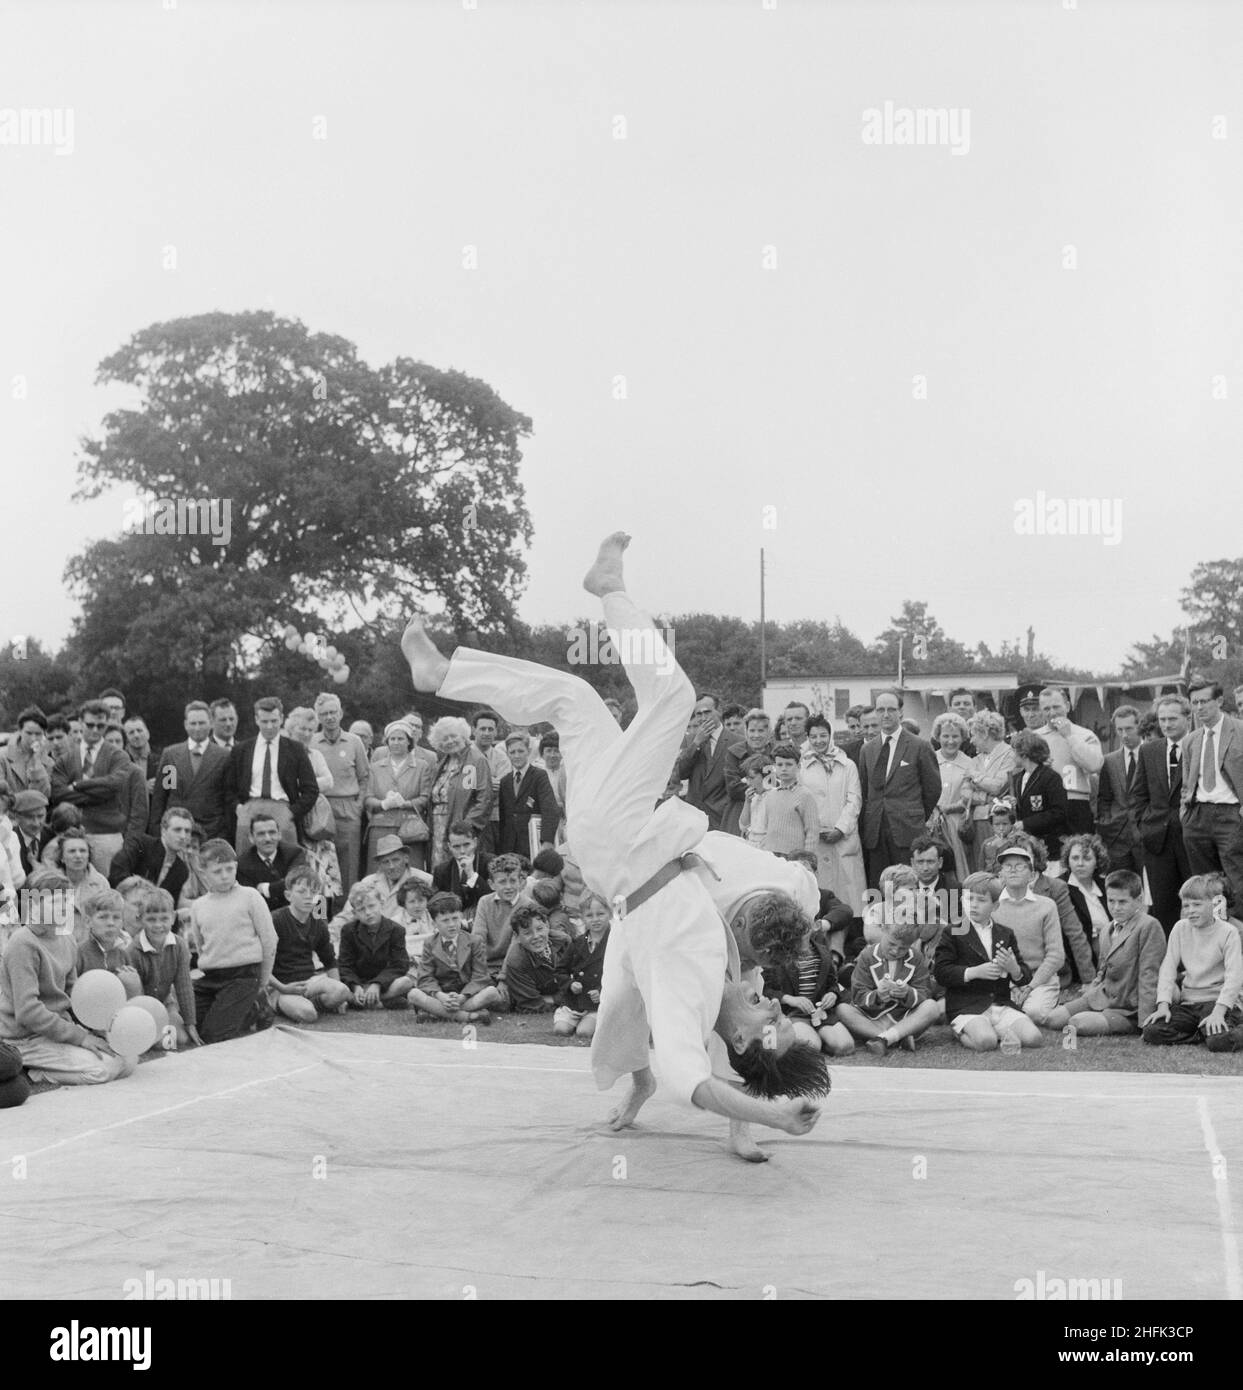 Laing Sports Ground, Rowley Lane, Elstree, Barnet, London, 17/06/1961. A crowd watching a judo demonstration by two members of the Metropolitan Police during a Laing sports day at Elstree. This image was published in July 1961 in Laing's monthly newsletter 'Team Spirit'. Stock Photo